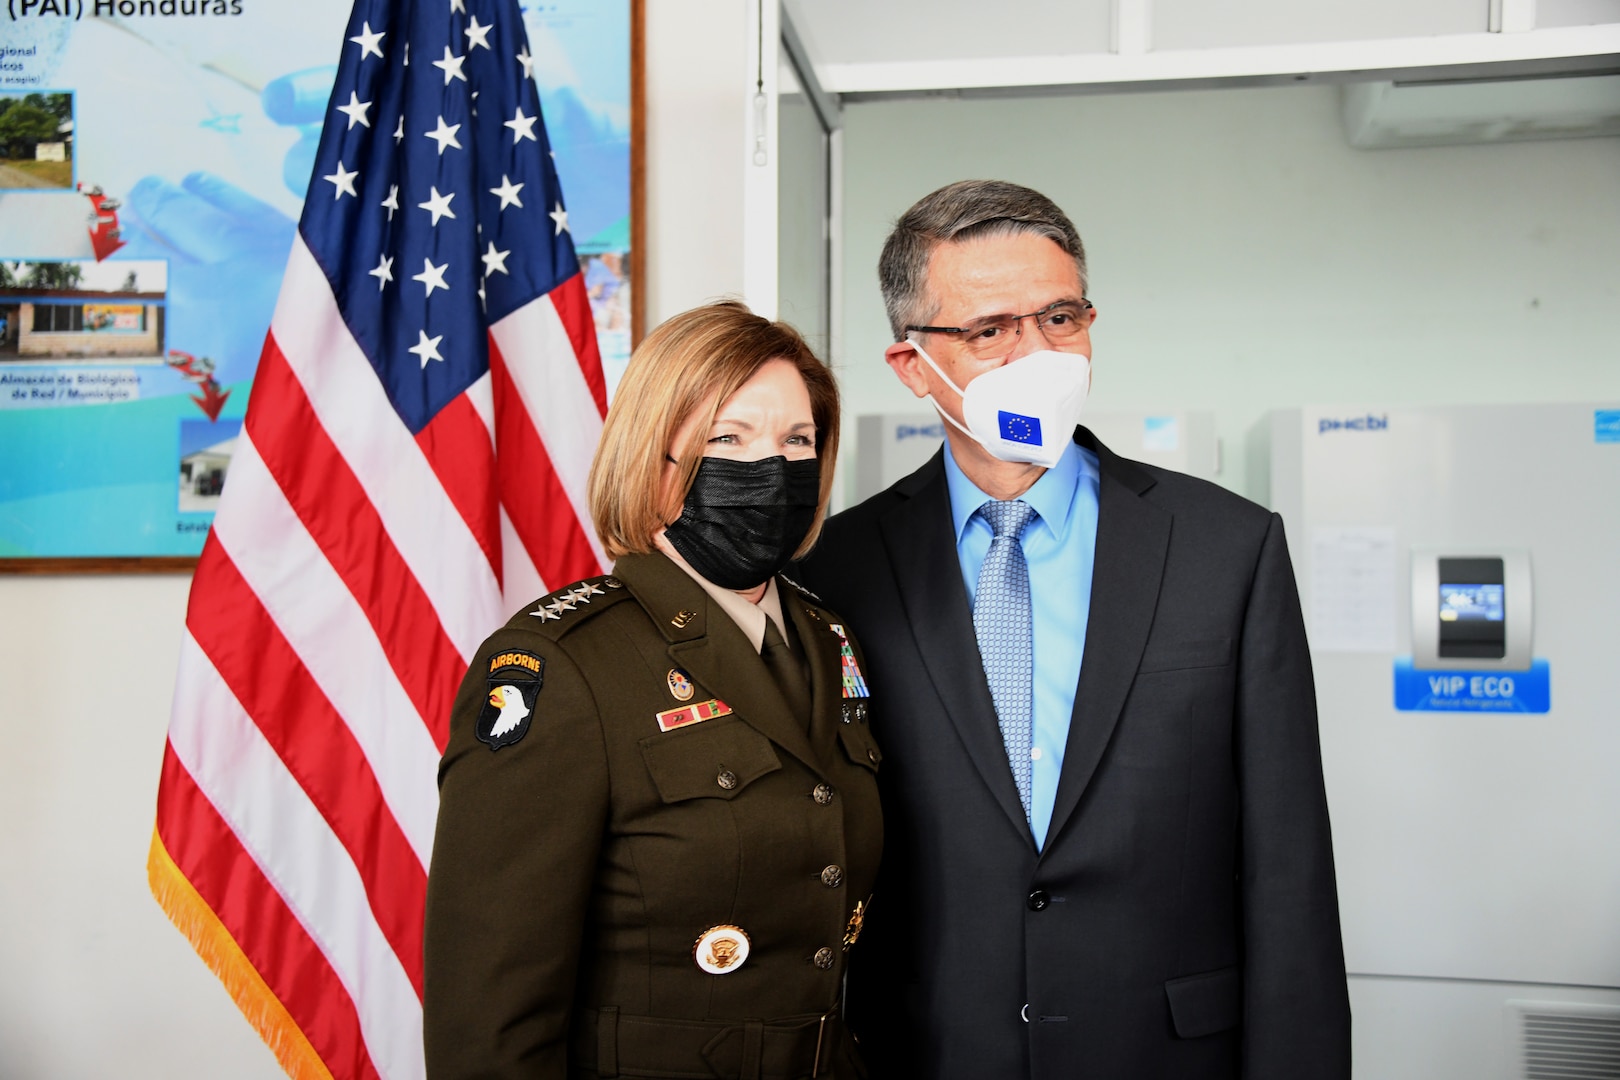 U.S. Army Gen. Laura Richardson, commander of U.S. Southern Command, poses for a photo with Honduran Minister of Health, José Manuel Matheu.